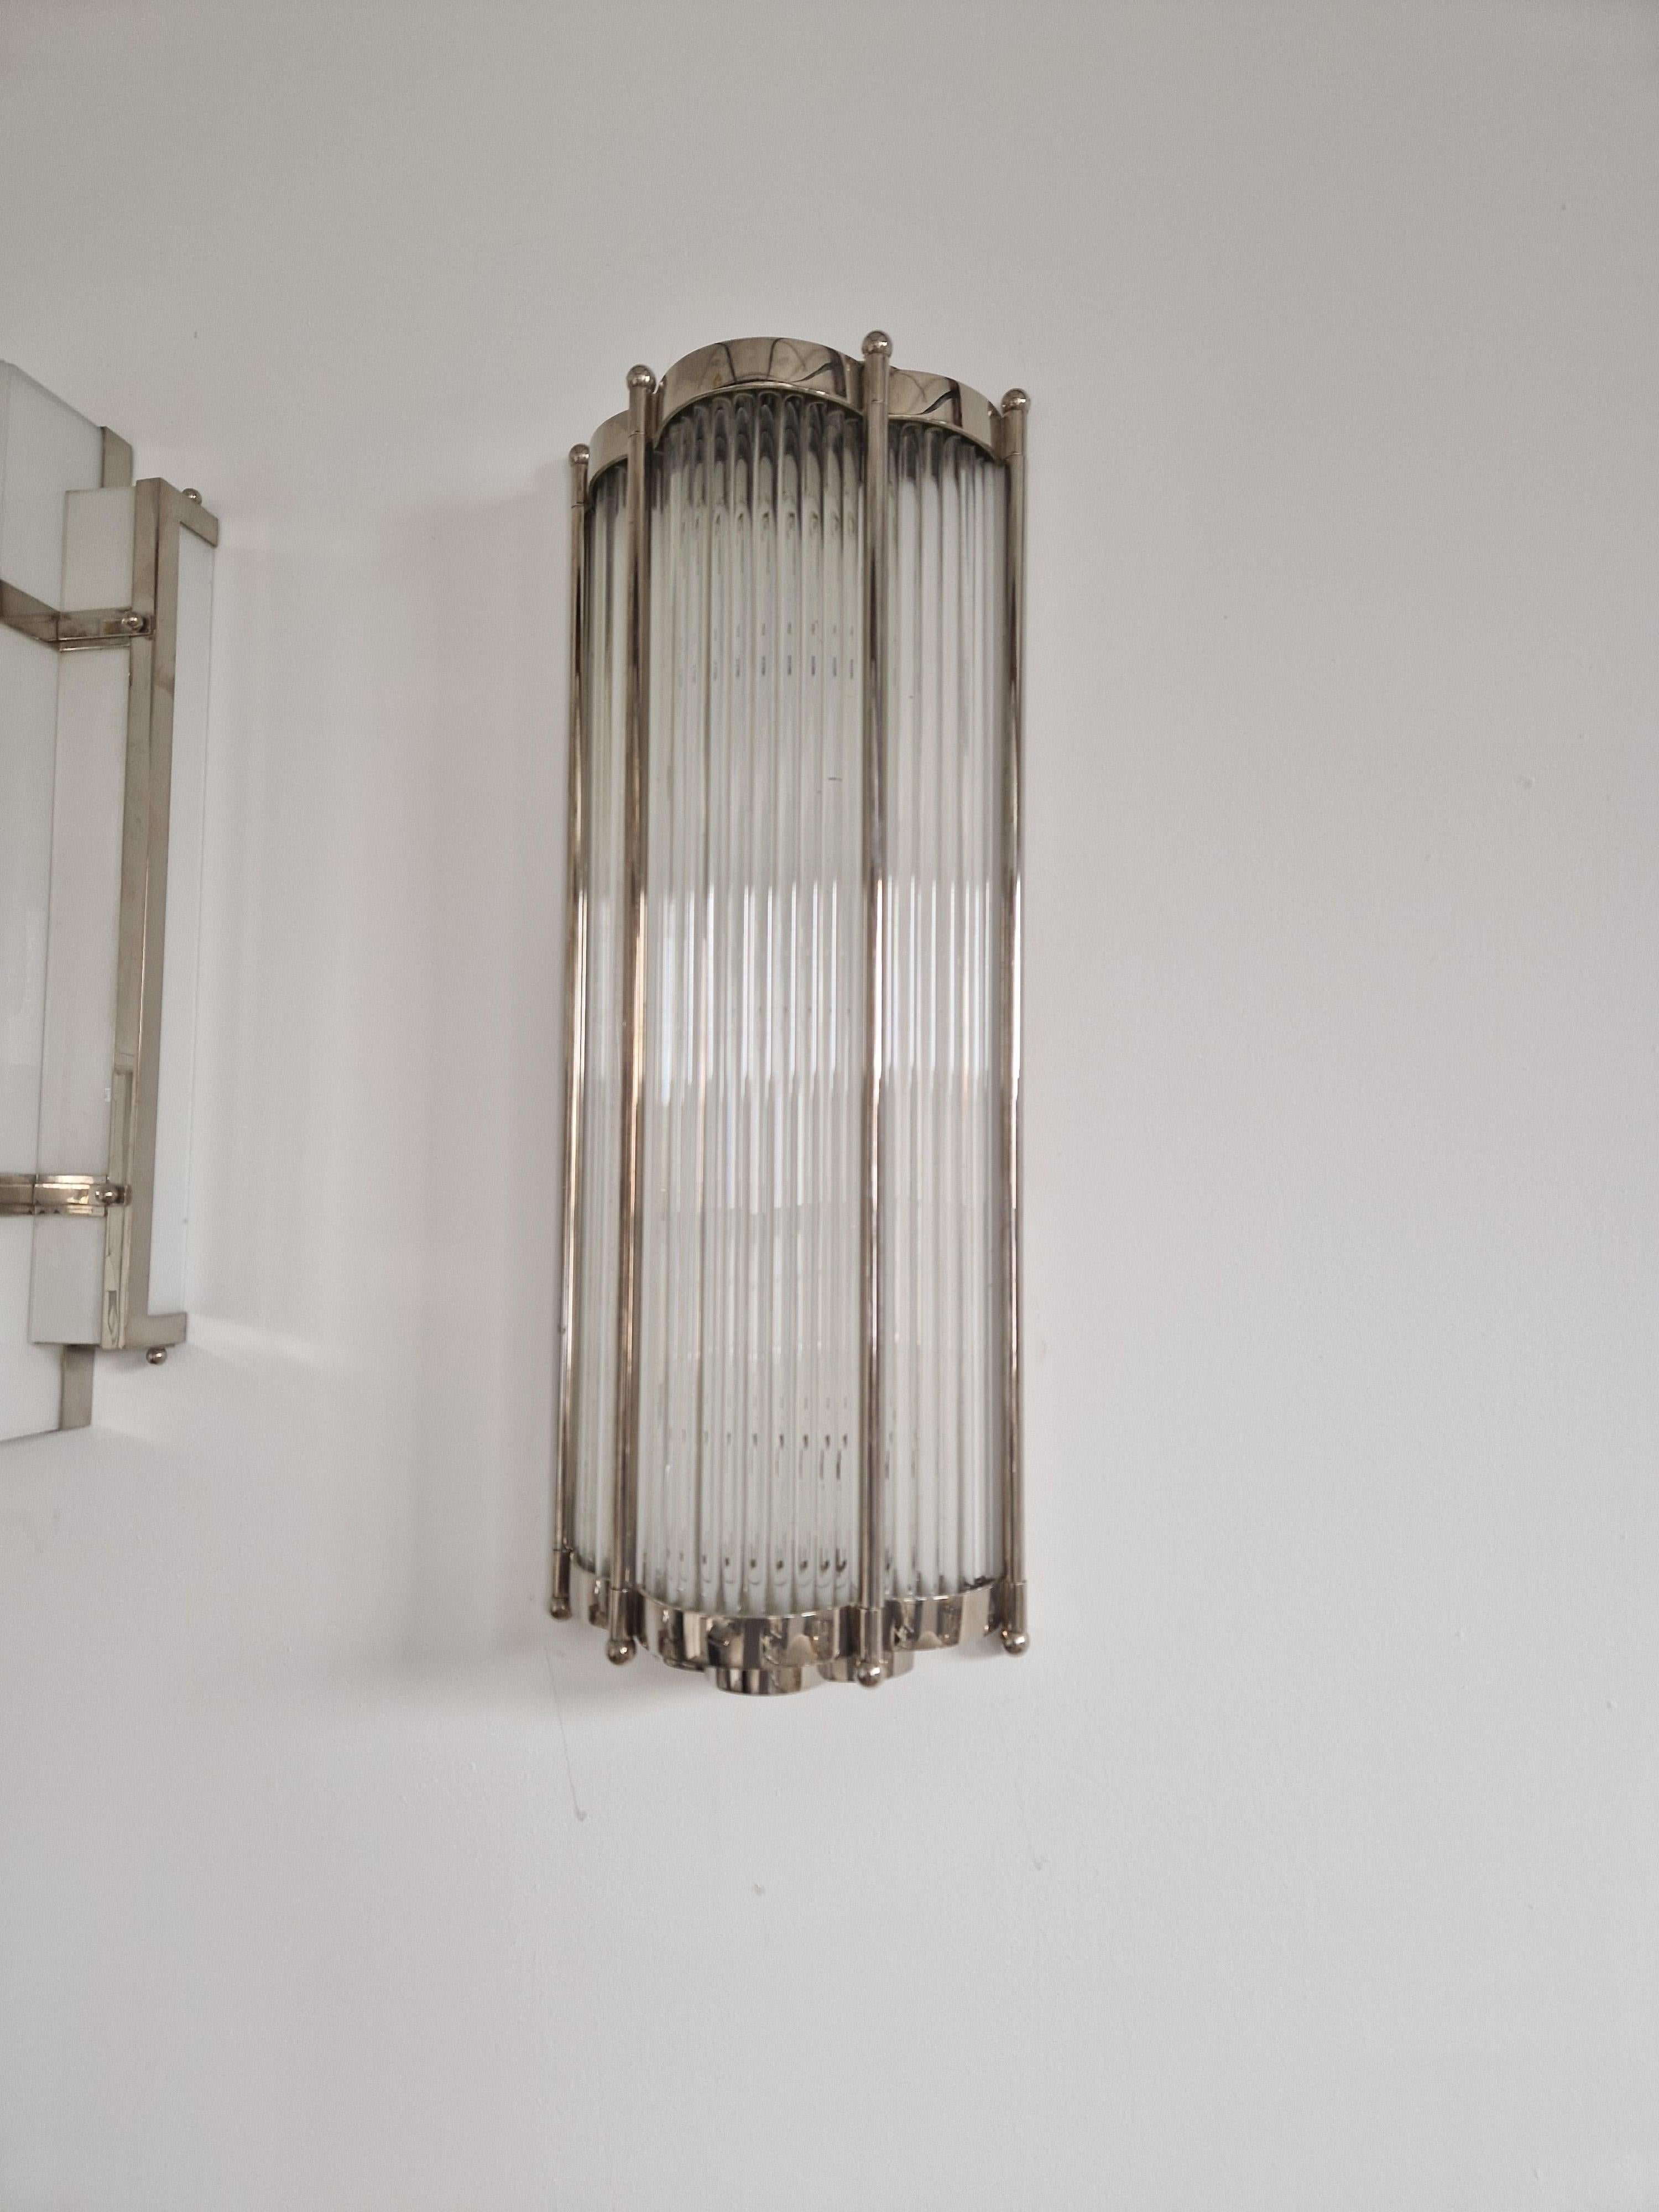 This Art Deco wall sconce from Sofar, made of high-quality nickel bronze and clear glass rods, is a classic and elegant lighting fixture. Inspired by the timeless Art Deco style of the 1930s, this wall sconce features a sophisticated design. The